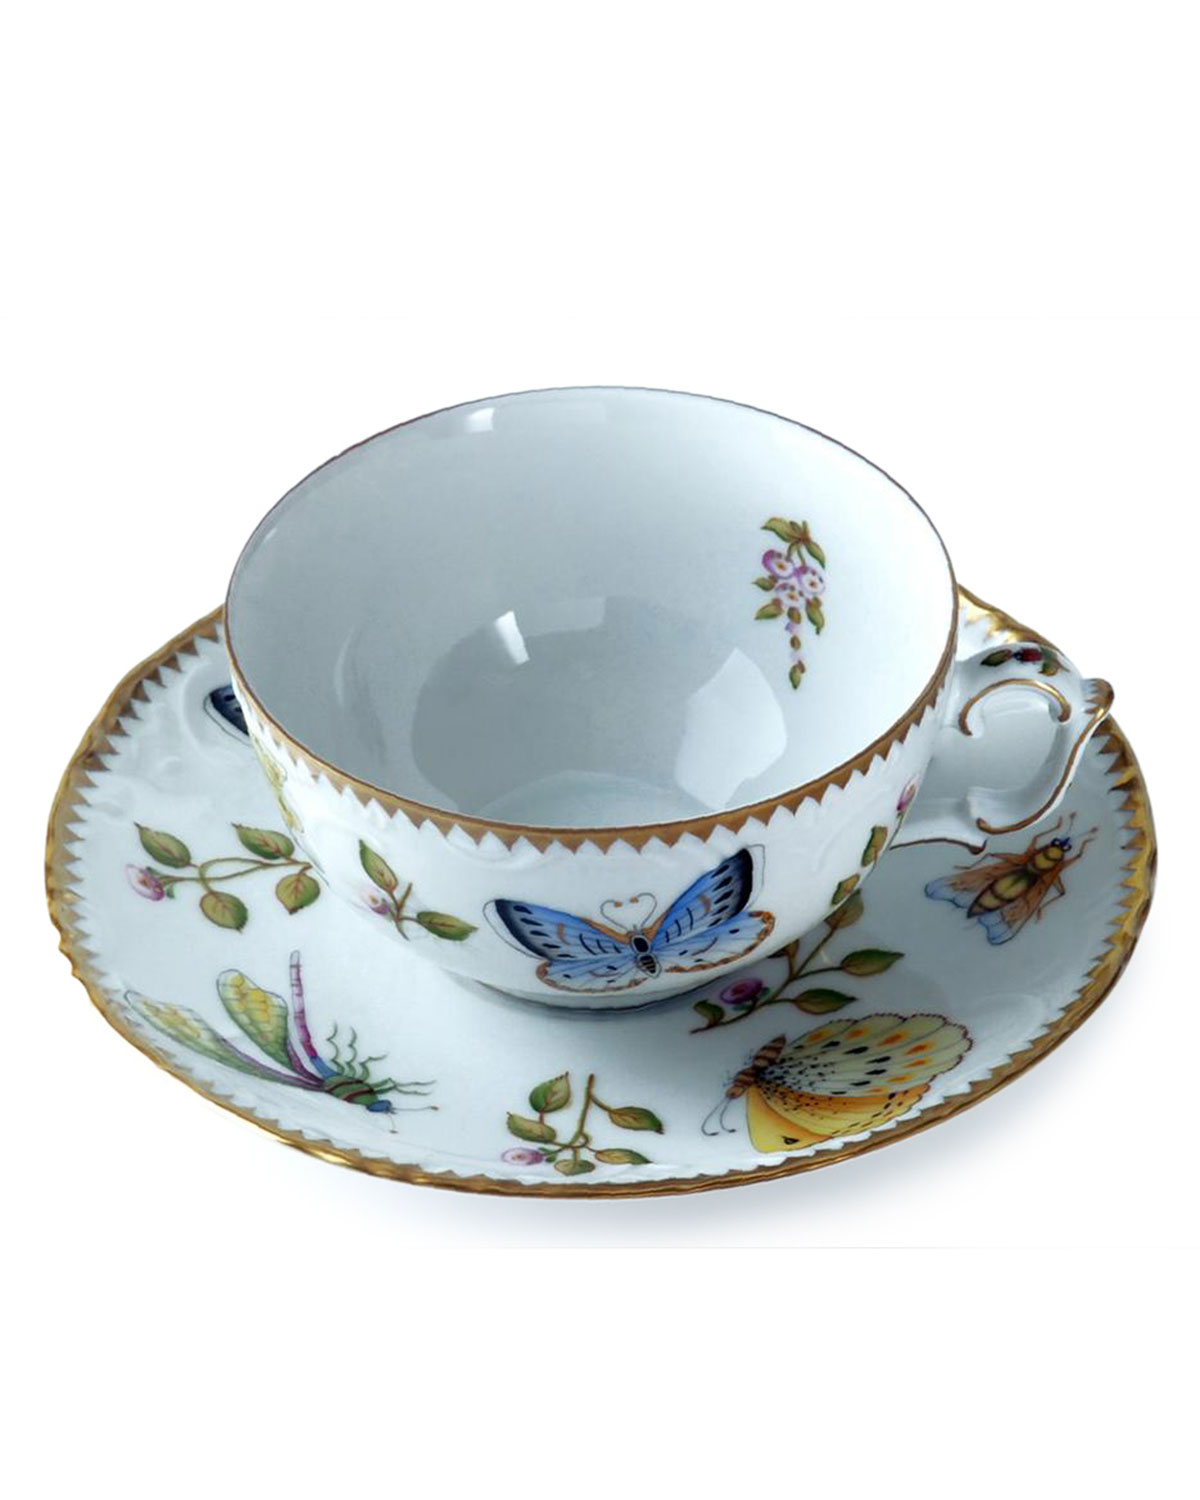 ANNA WEATHERLEY SPRING IN BUDAPEST TEACUP AND SAUCER,PROD202660393